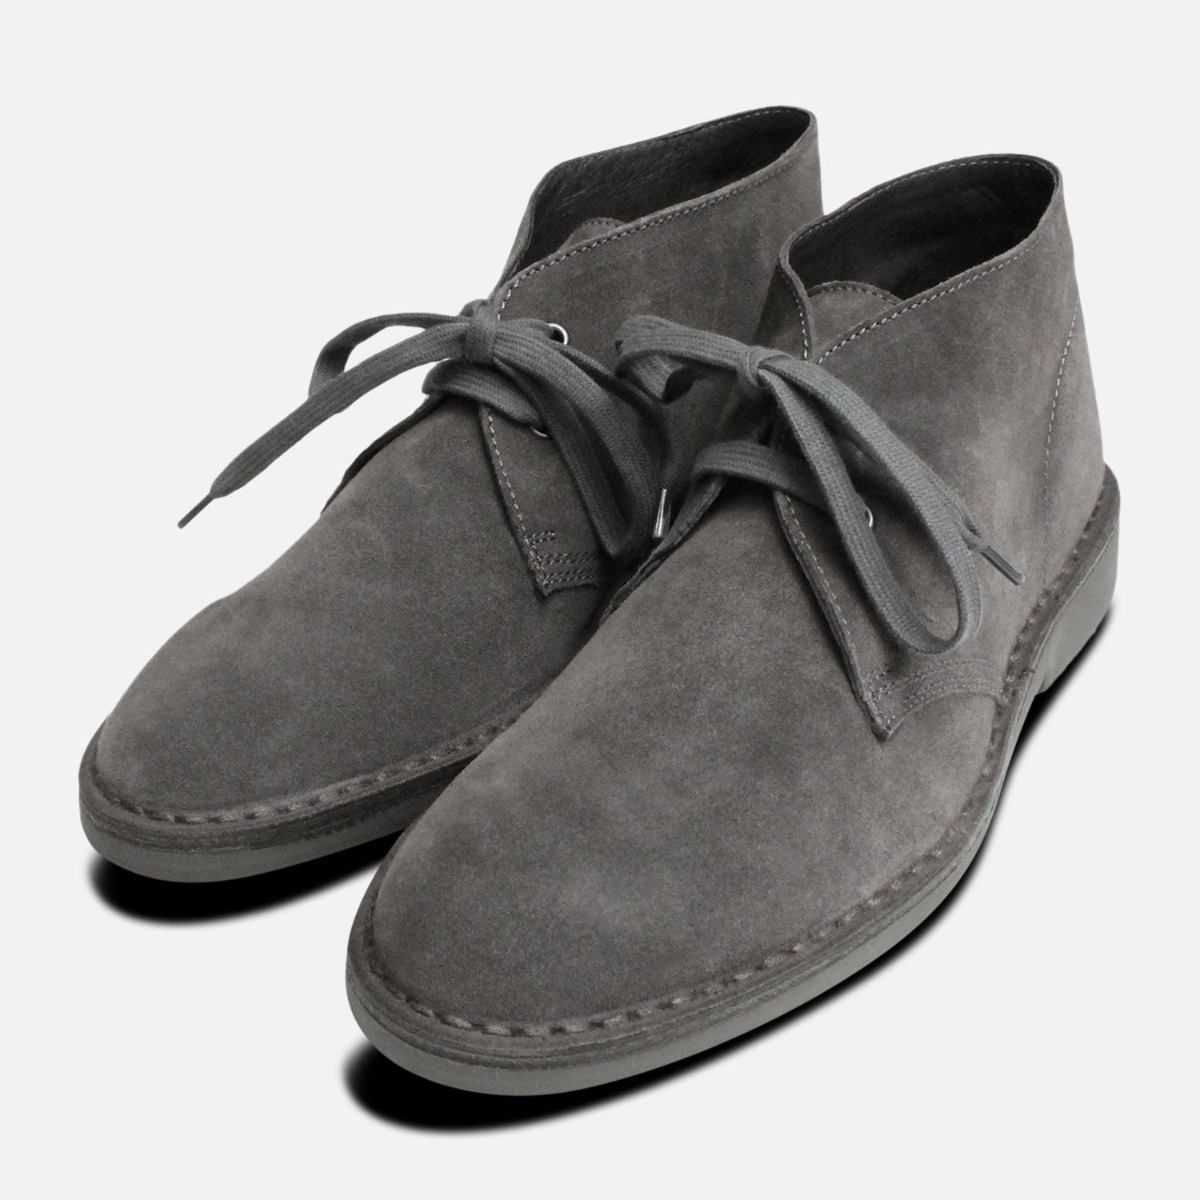 gray suede boots mens